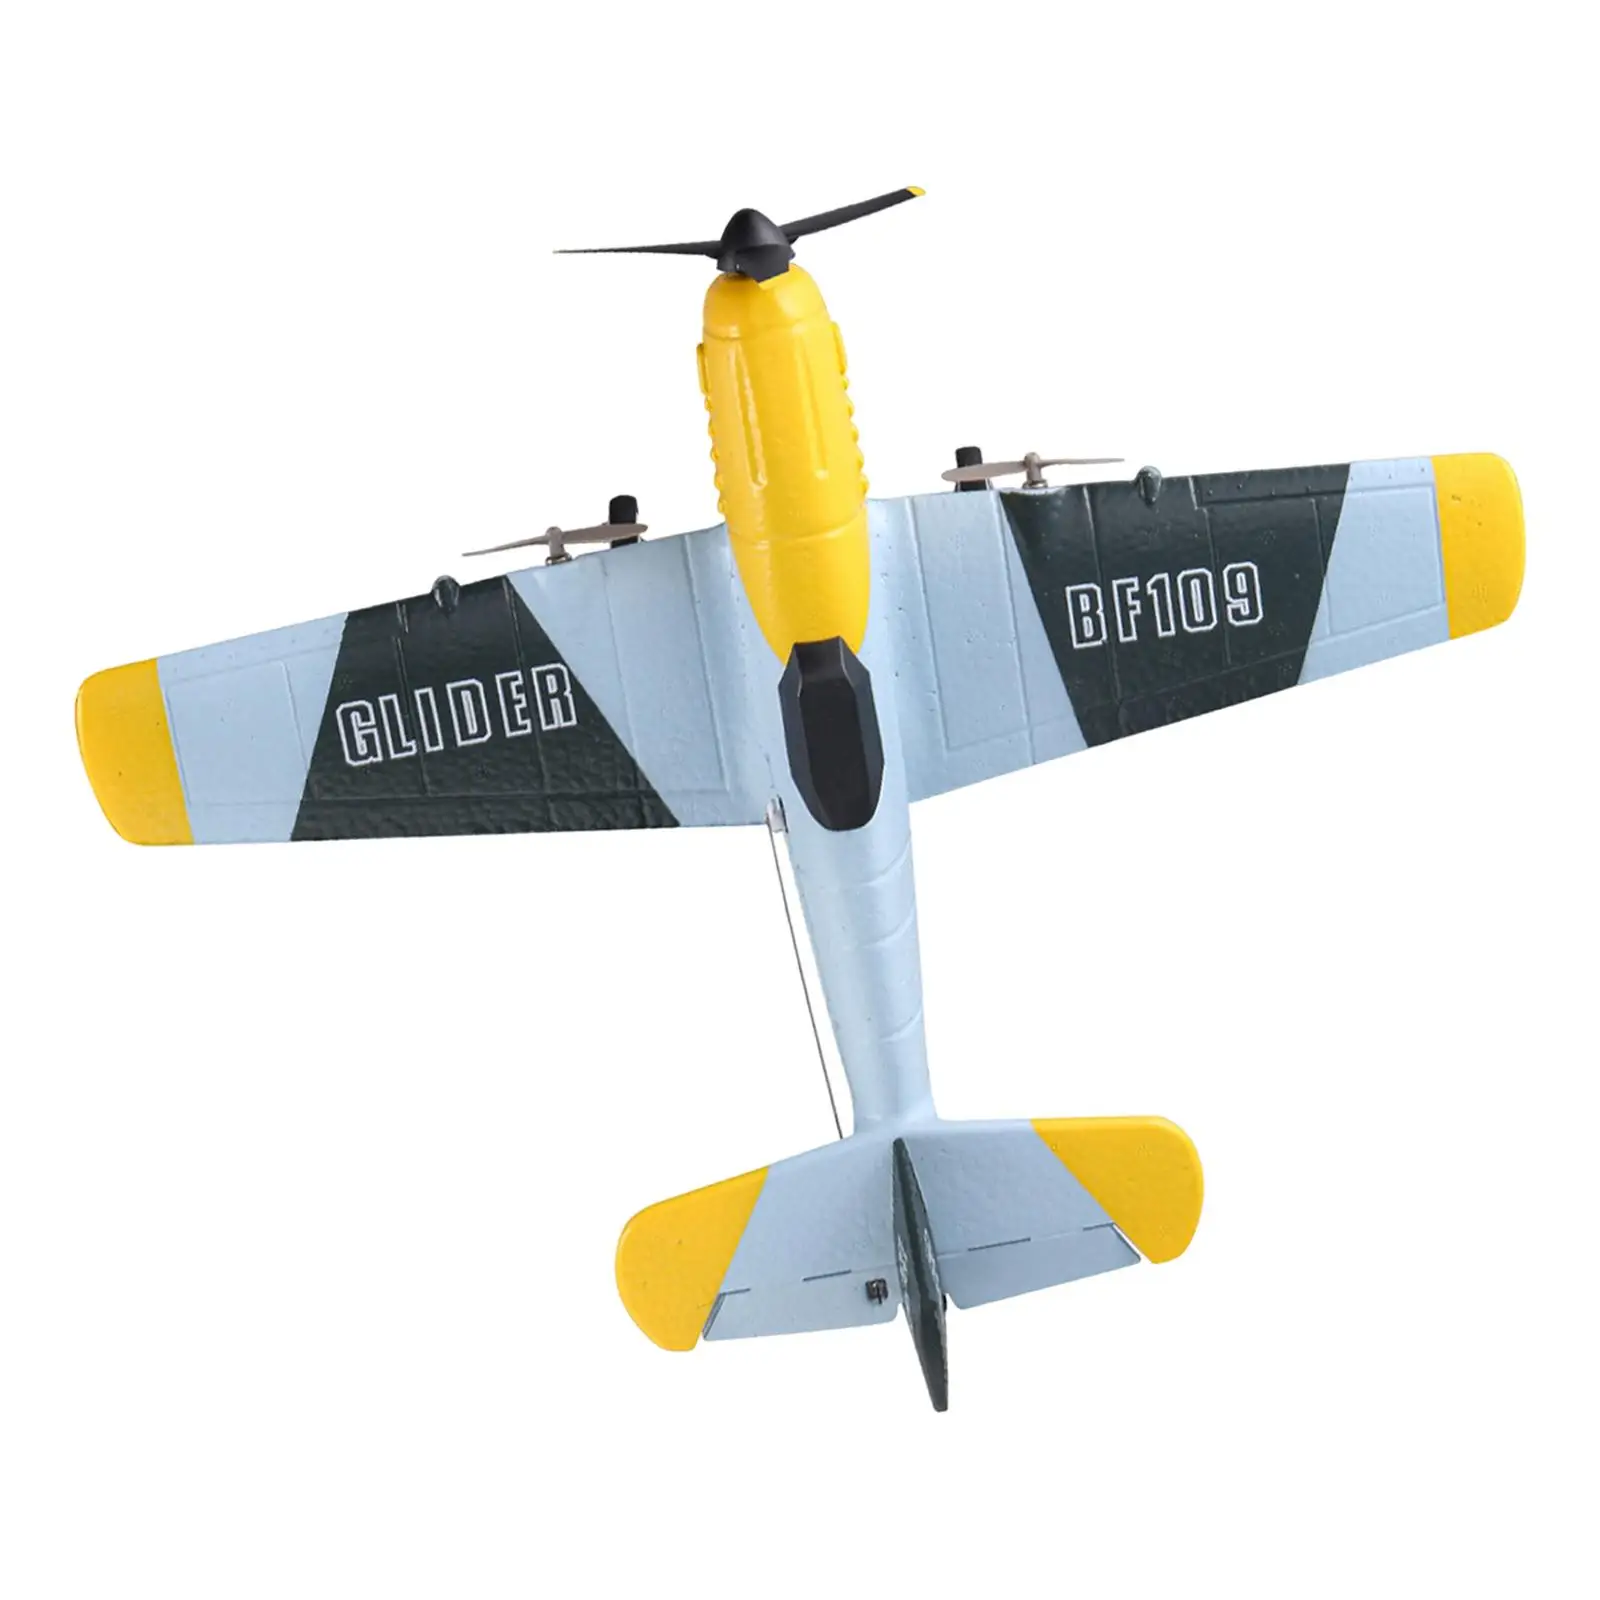 3 CH RC Easy to Control Gift Lightweight RC Glider RC Aircraft Jet Foam RC Airplane for Beginner Adults Kids Boys Girls